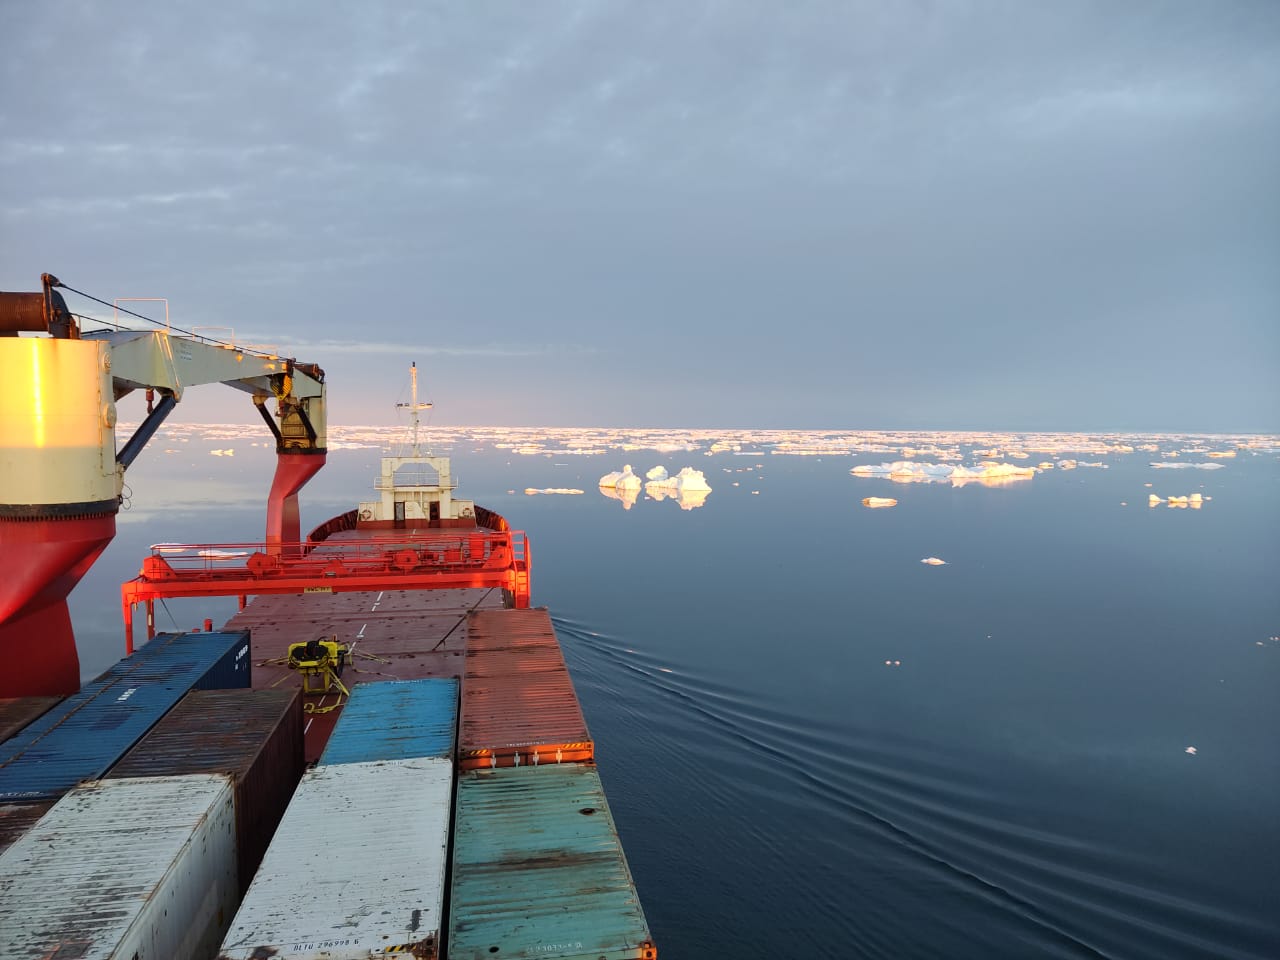 Arctic development budget for 2022-2023 to be increased